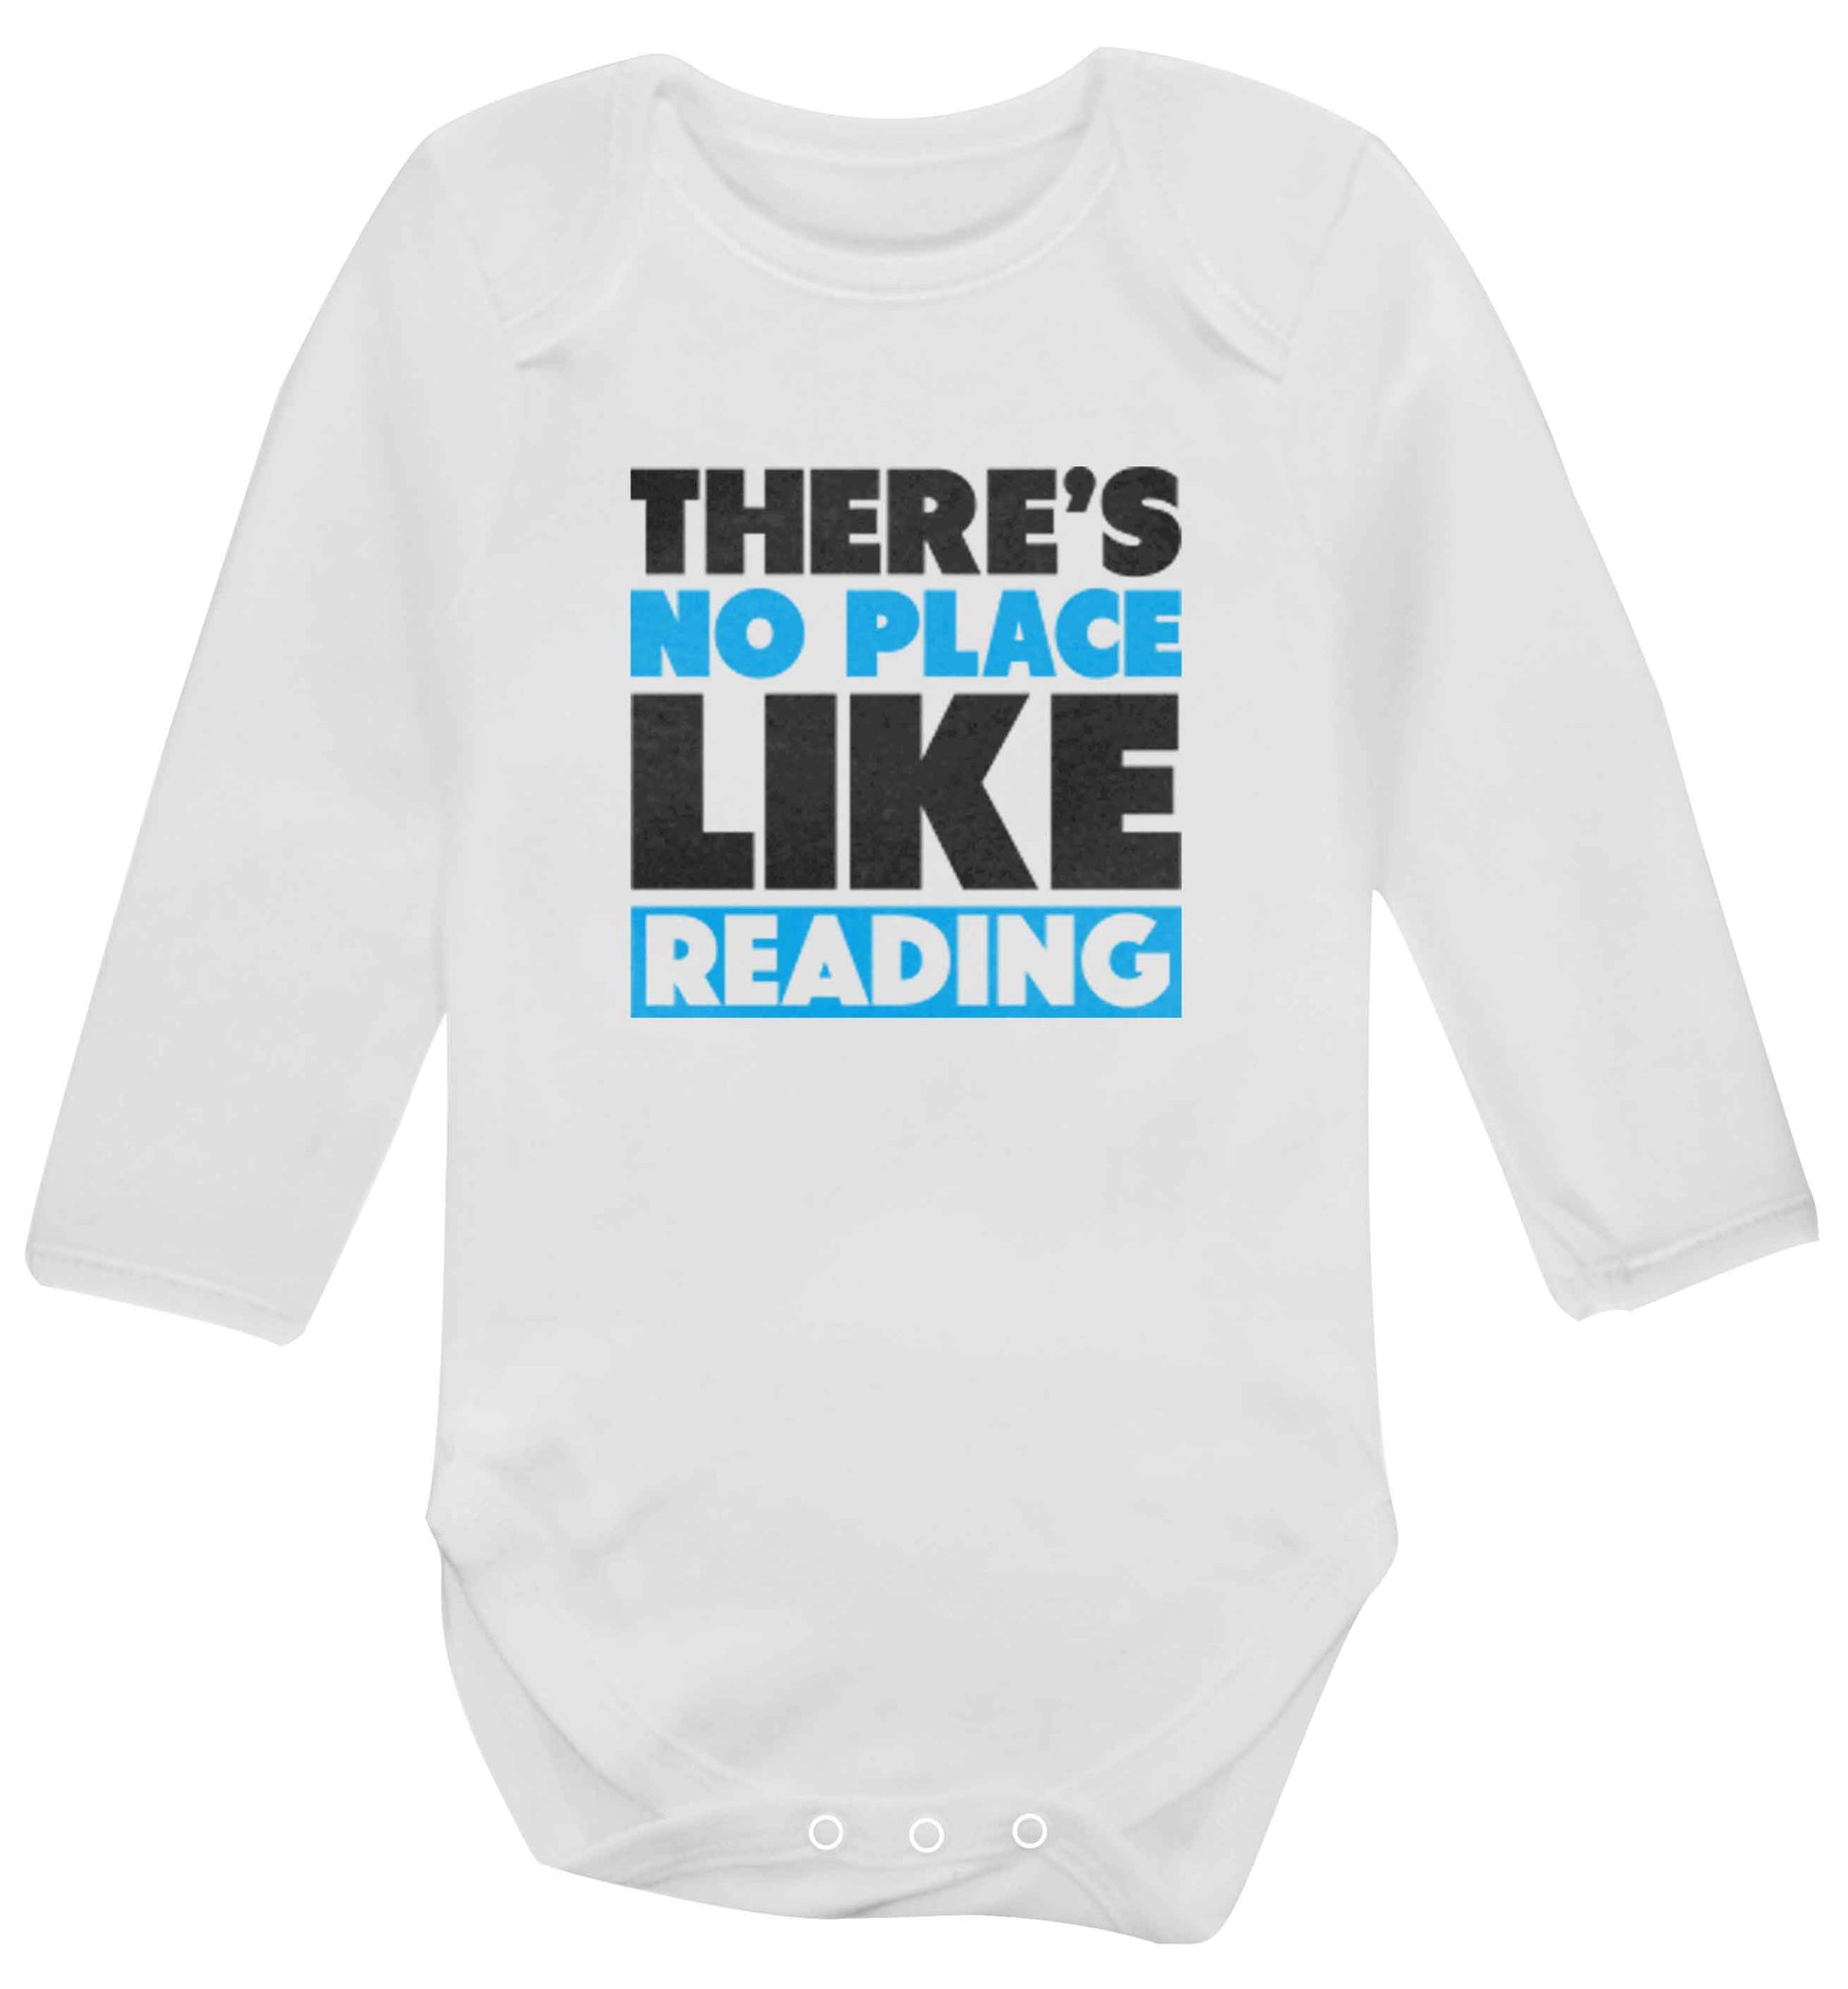 There's no place like Readingbaby vest long sleeved white 6-12 months